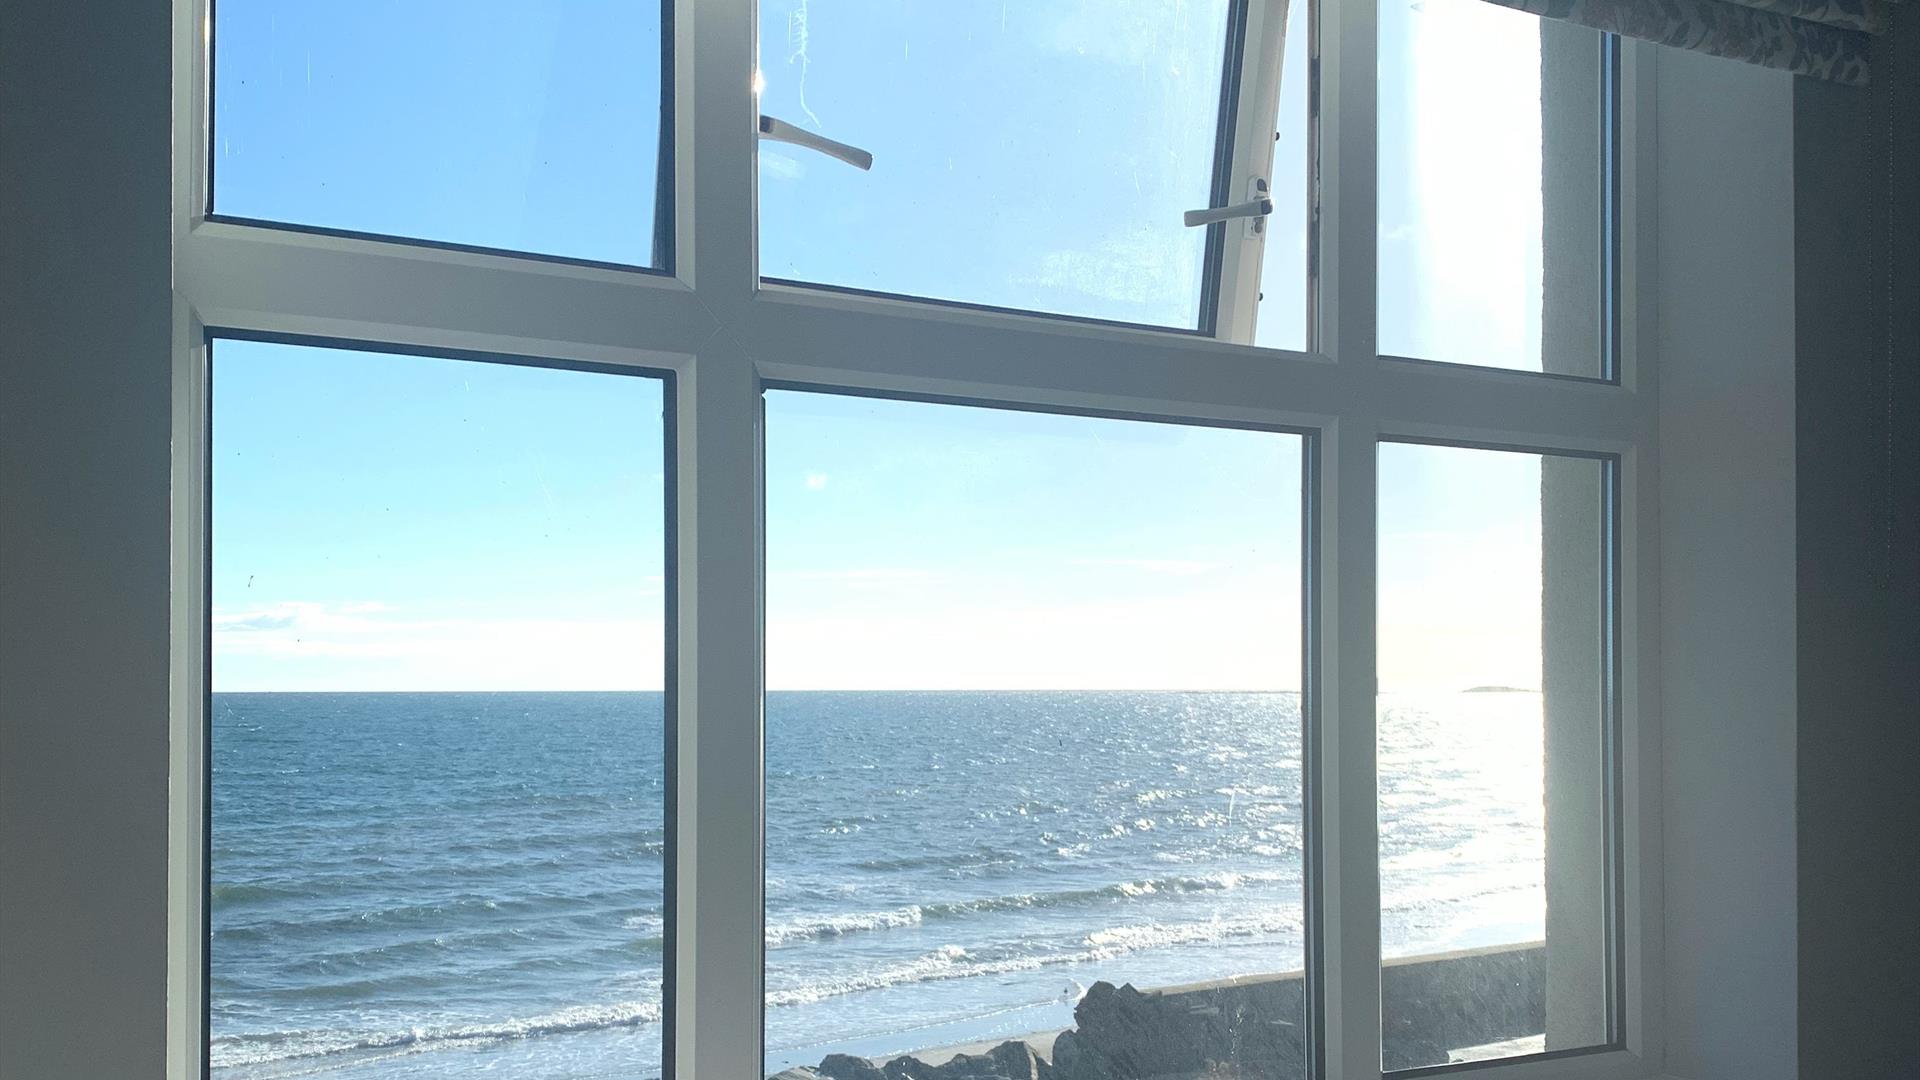 Sunny seaview from bedroom